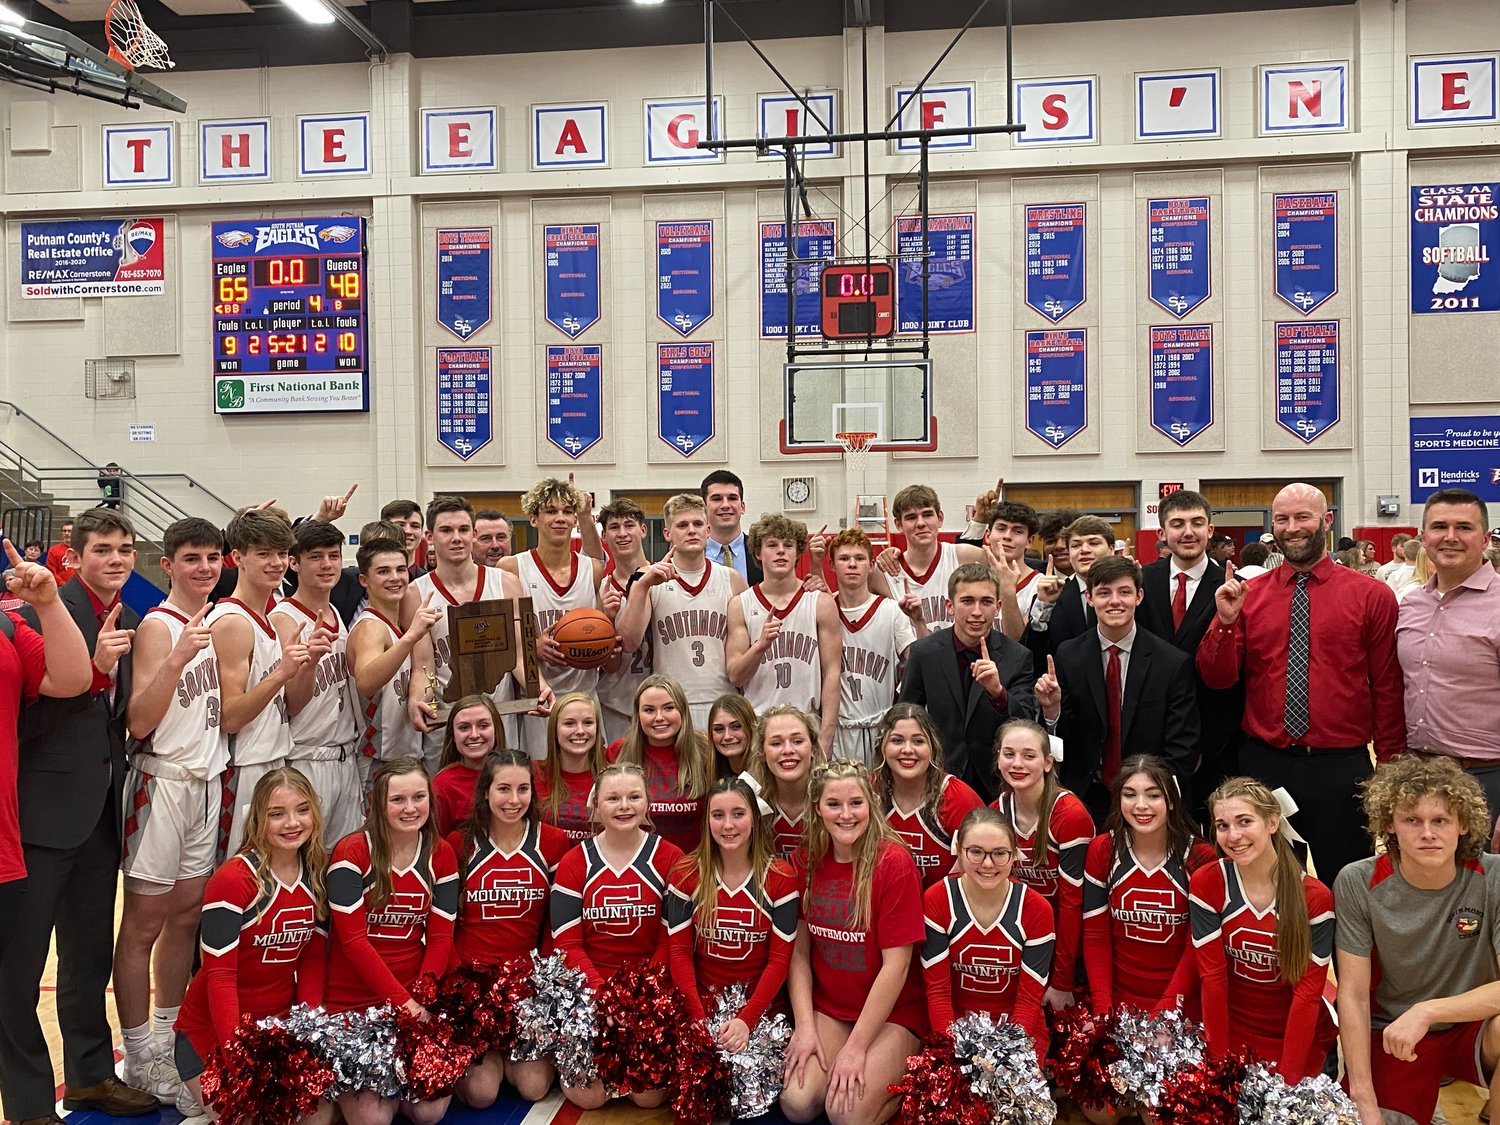 Southmont will look to add on to their historic season Saturday morning when they take on 20-5 Eastern 
Hancock in the first game of the Greenfield Central Regional at 10 a.m.